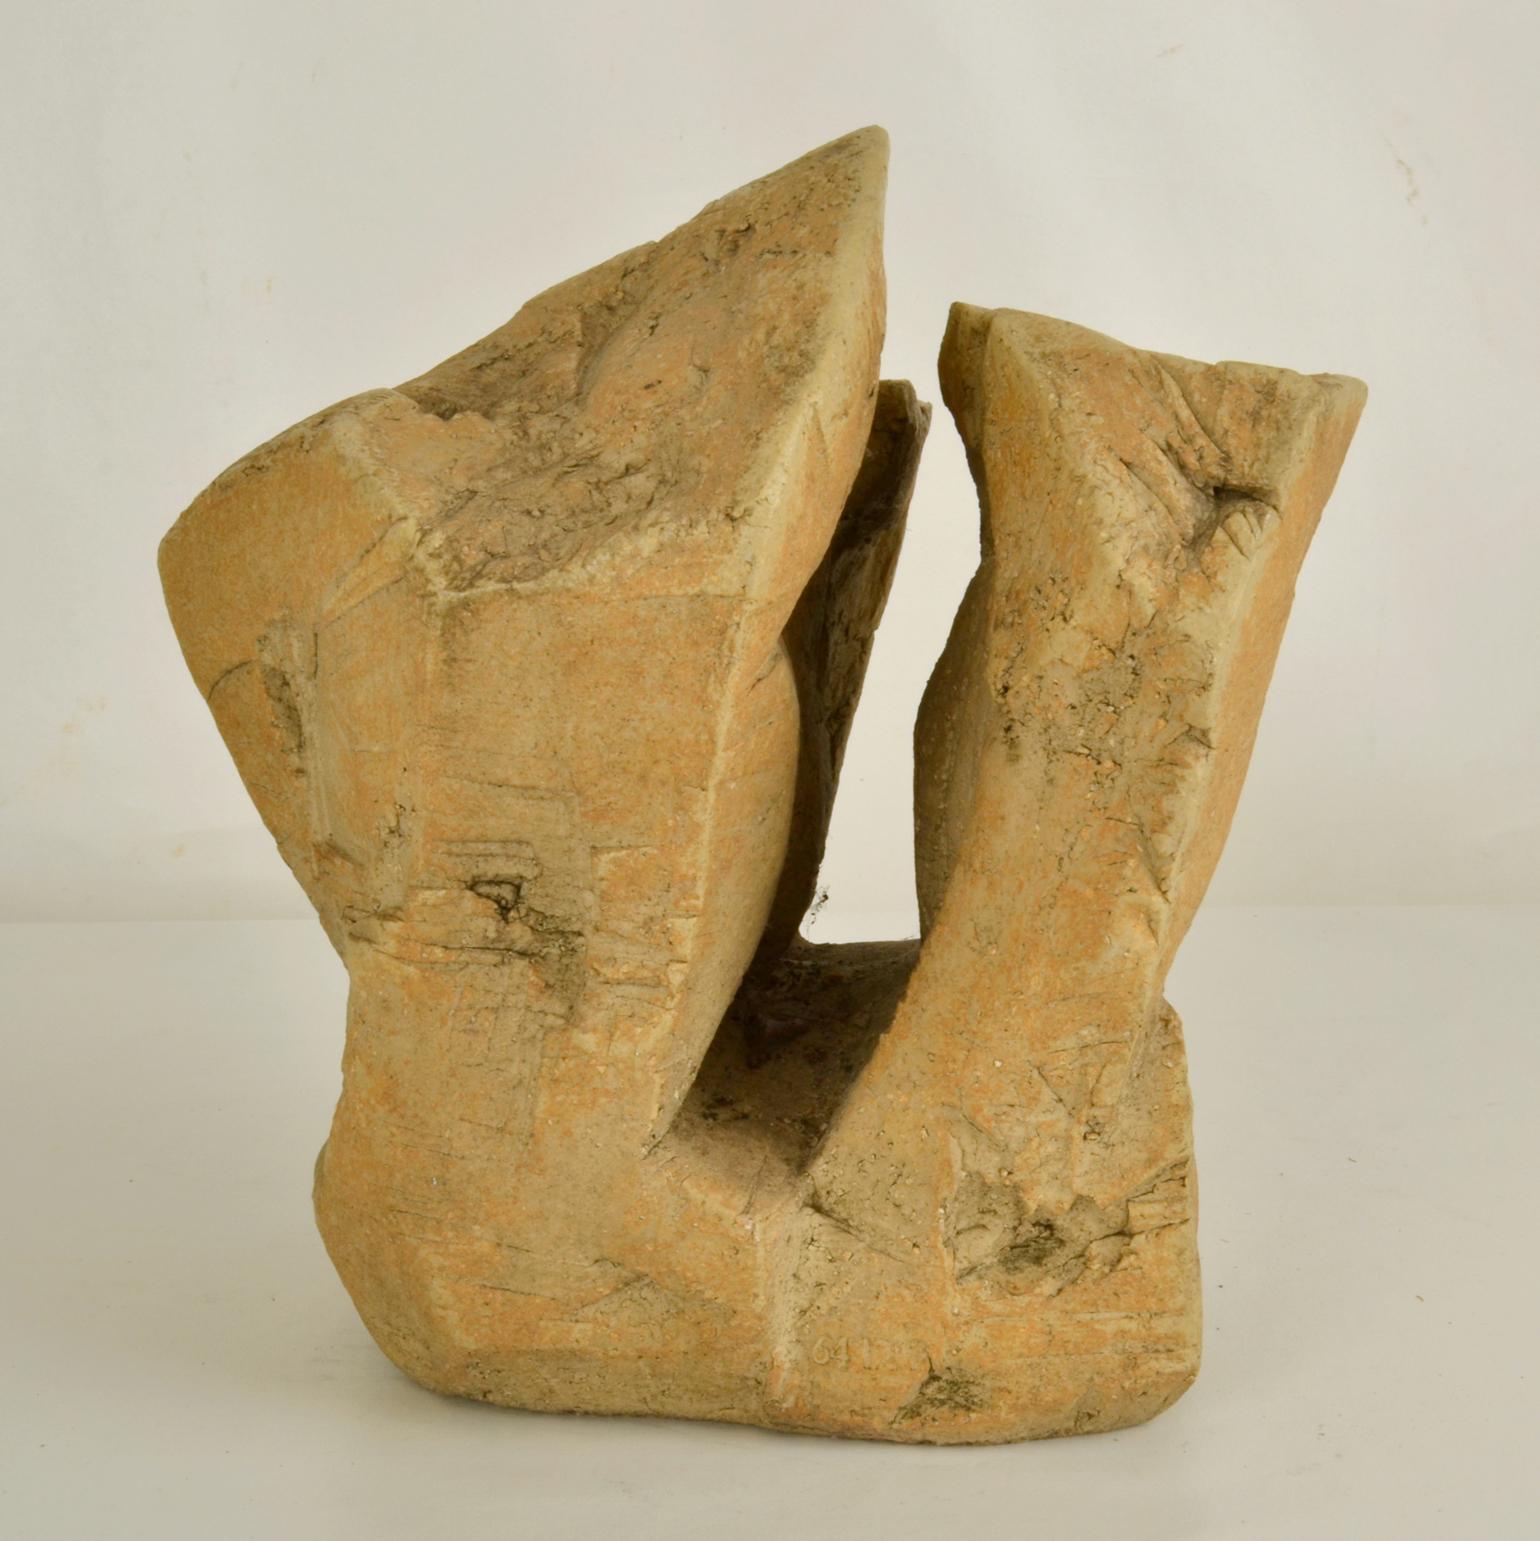 Hand formed ceramic rock sculpture in sand color looks like the coastal cliffs on the British coast line. Bryan Blow's work echoes a voyage of discovery in not just the visible natural world of trees, rocks but the city and Industrial landscape with